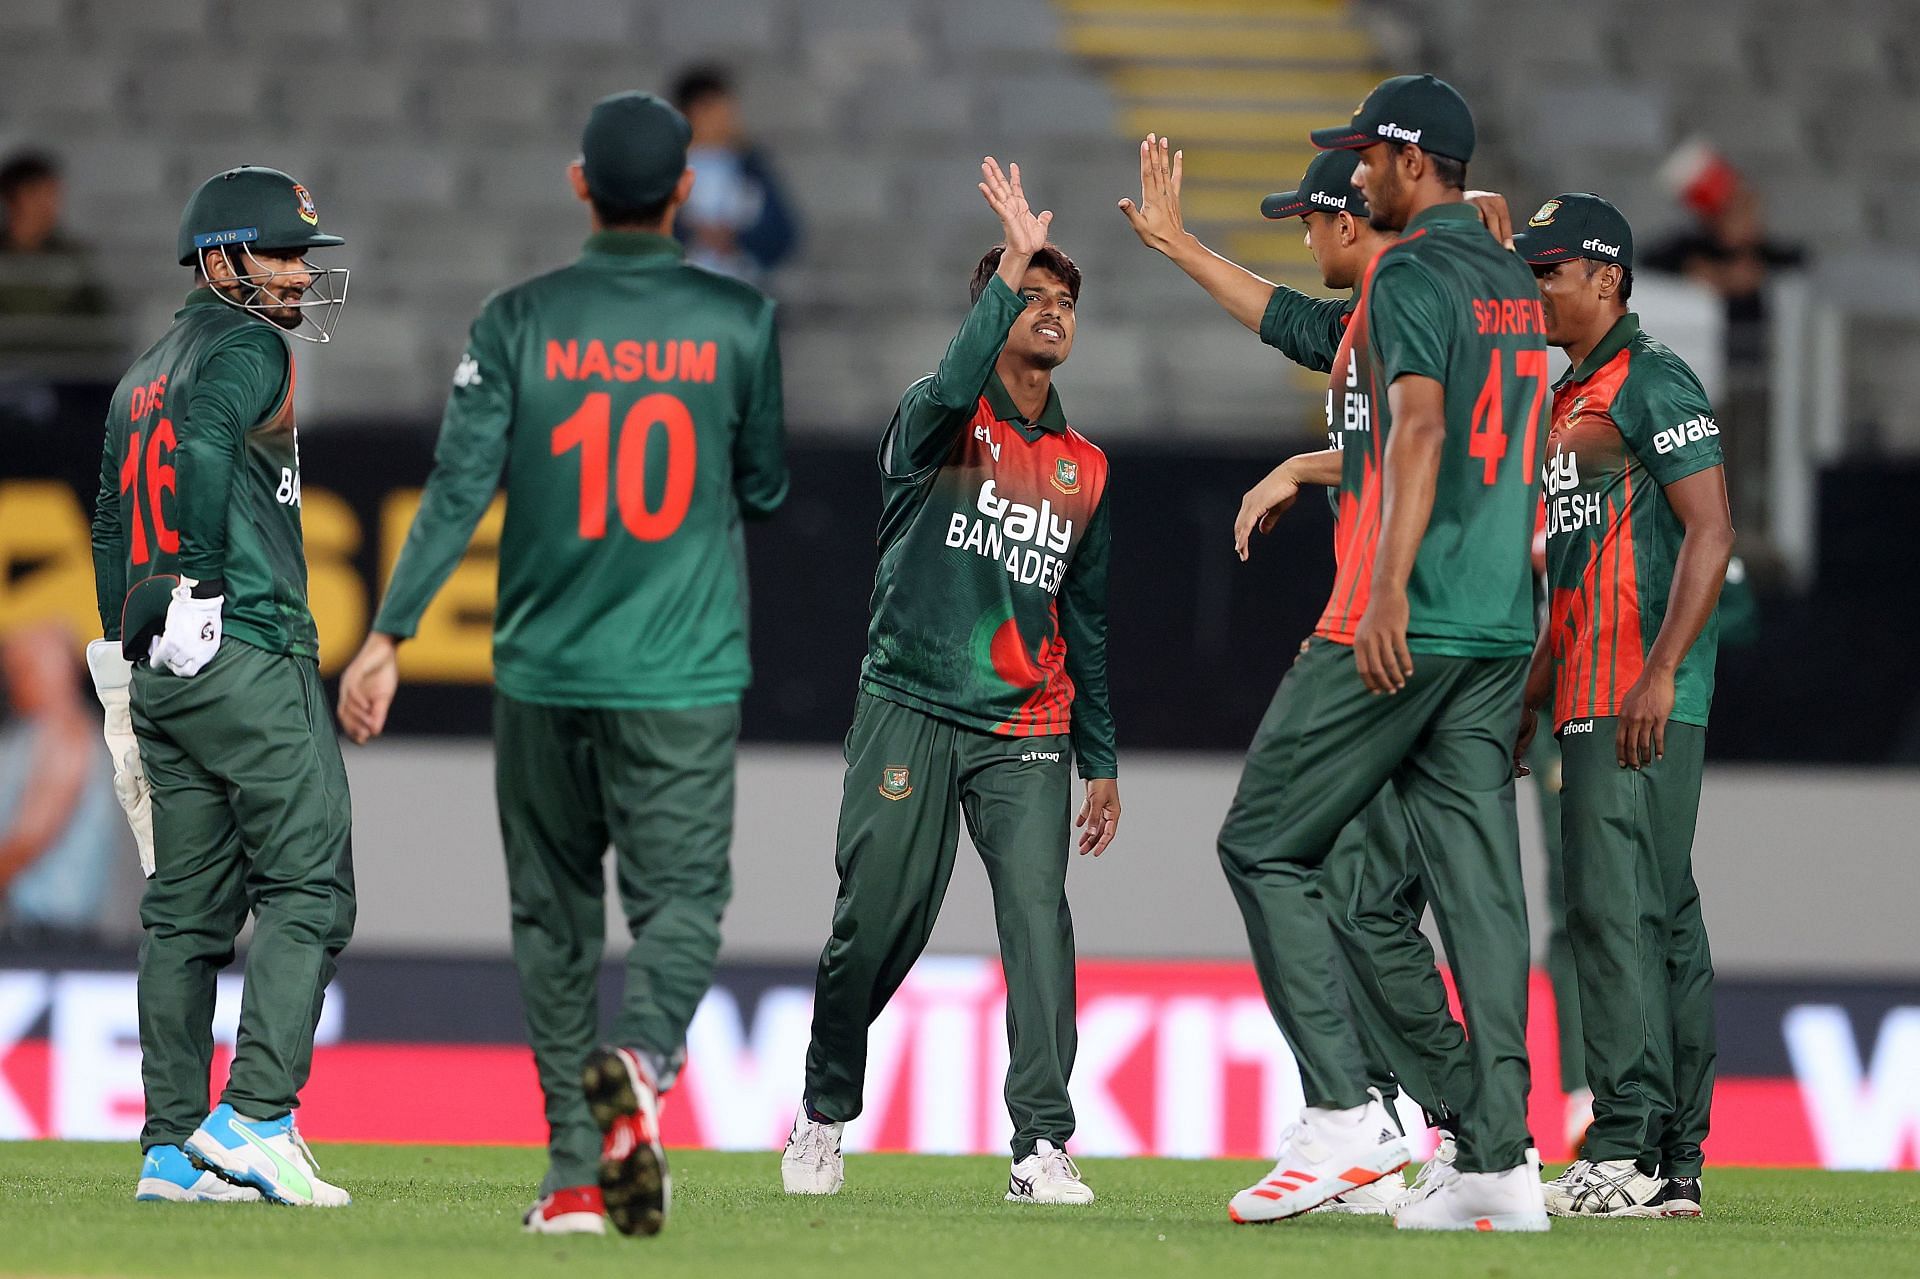 Bangladesh have become the No. 1 team on the ICC Cricket World Cup Super League points table